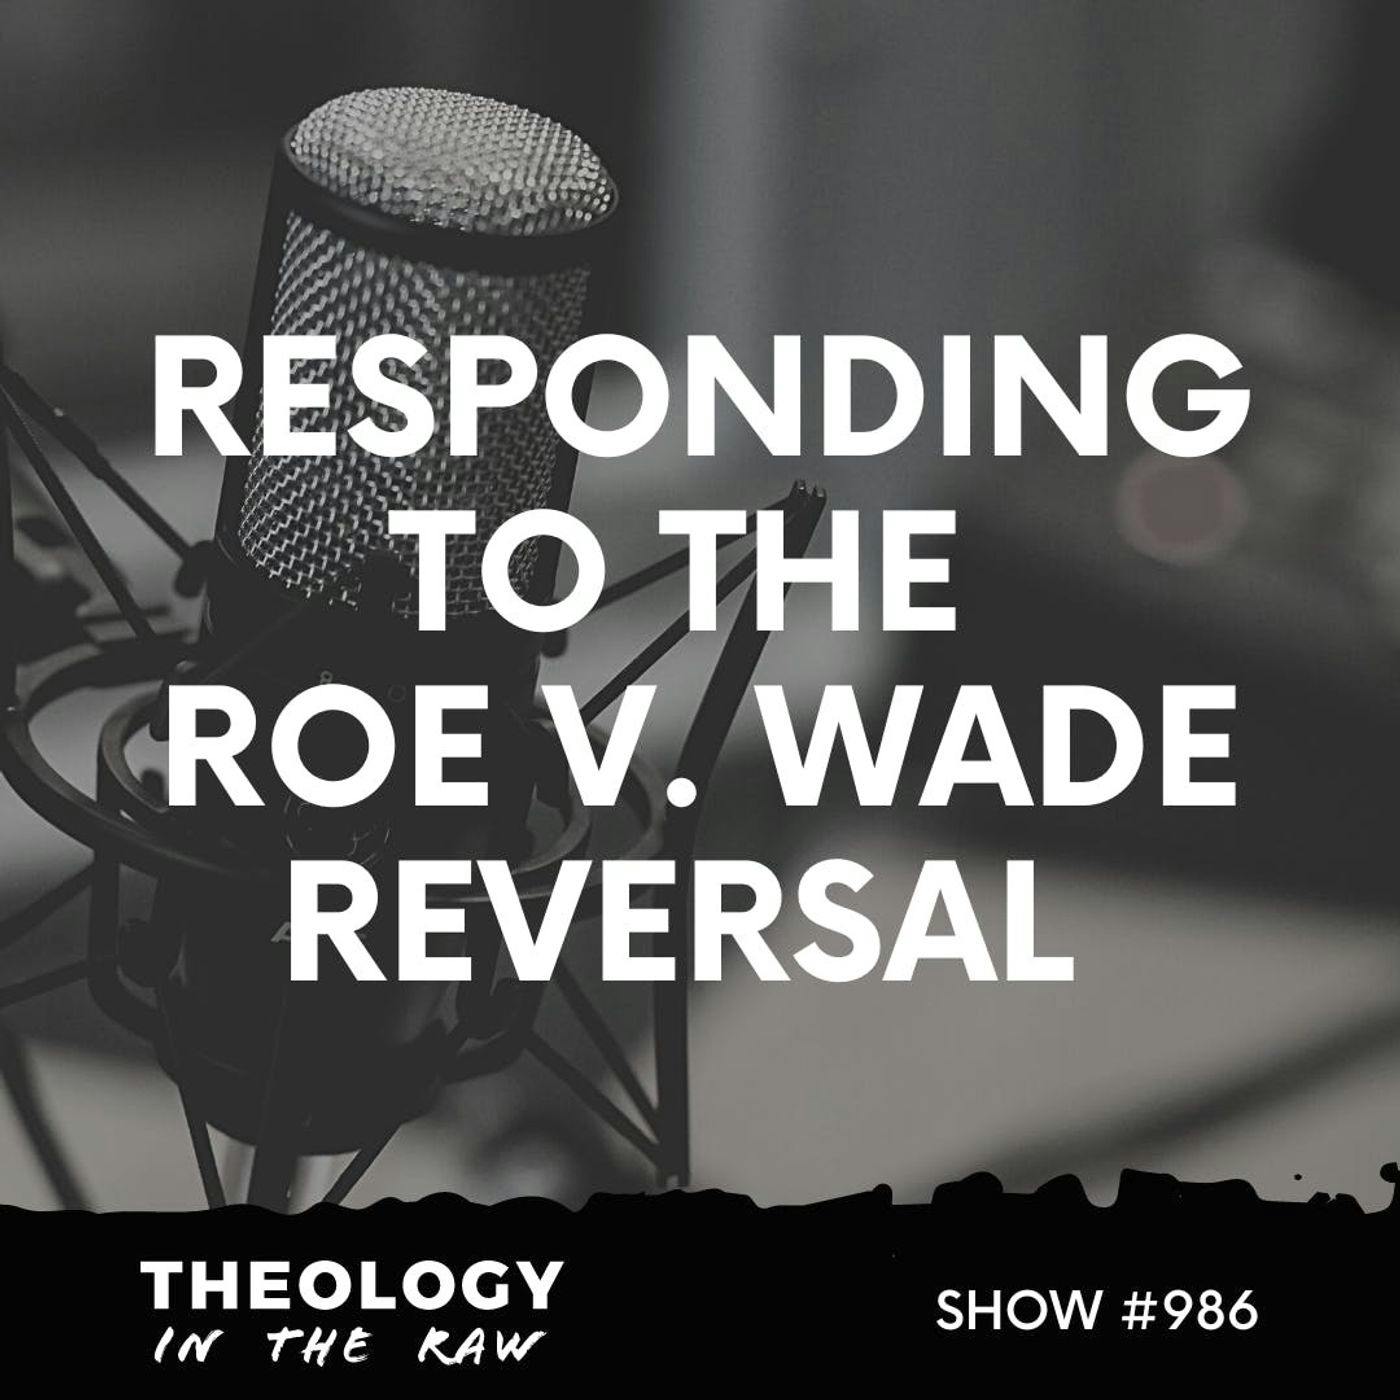 S9 Ep986: #986 - Responding to the Roe V. Wade Reversal with Dr. Scott Rae